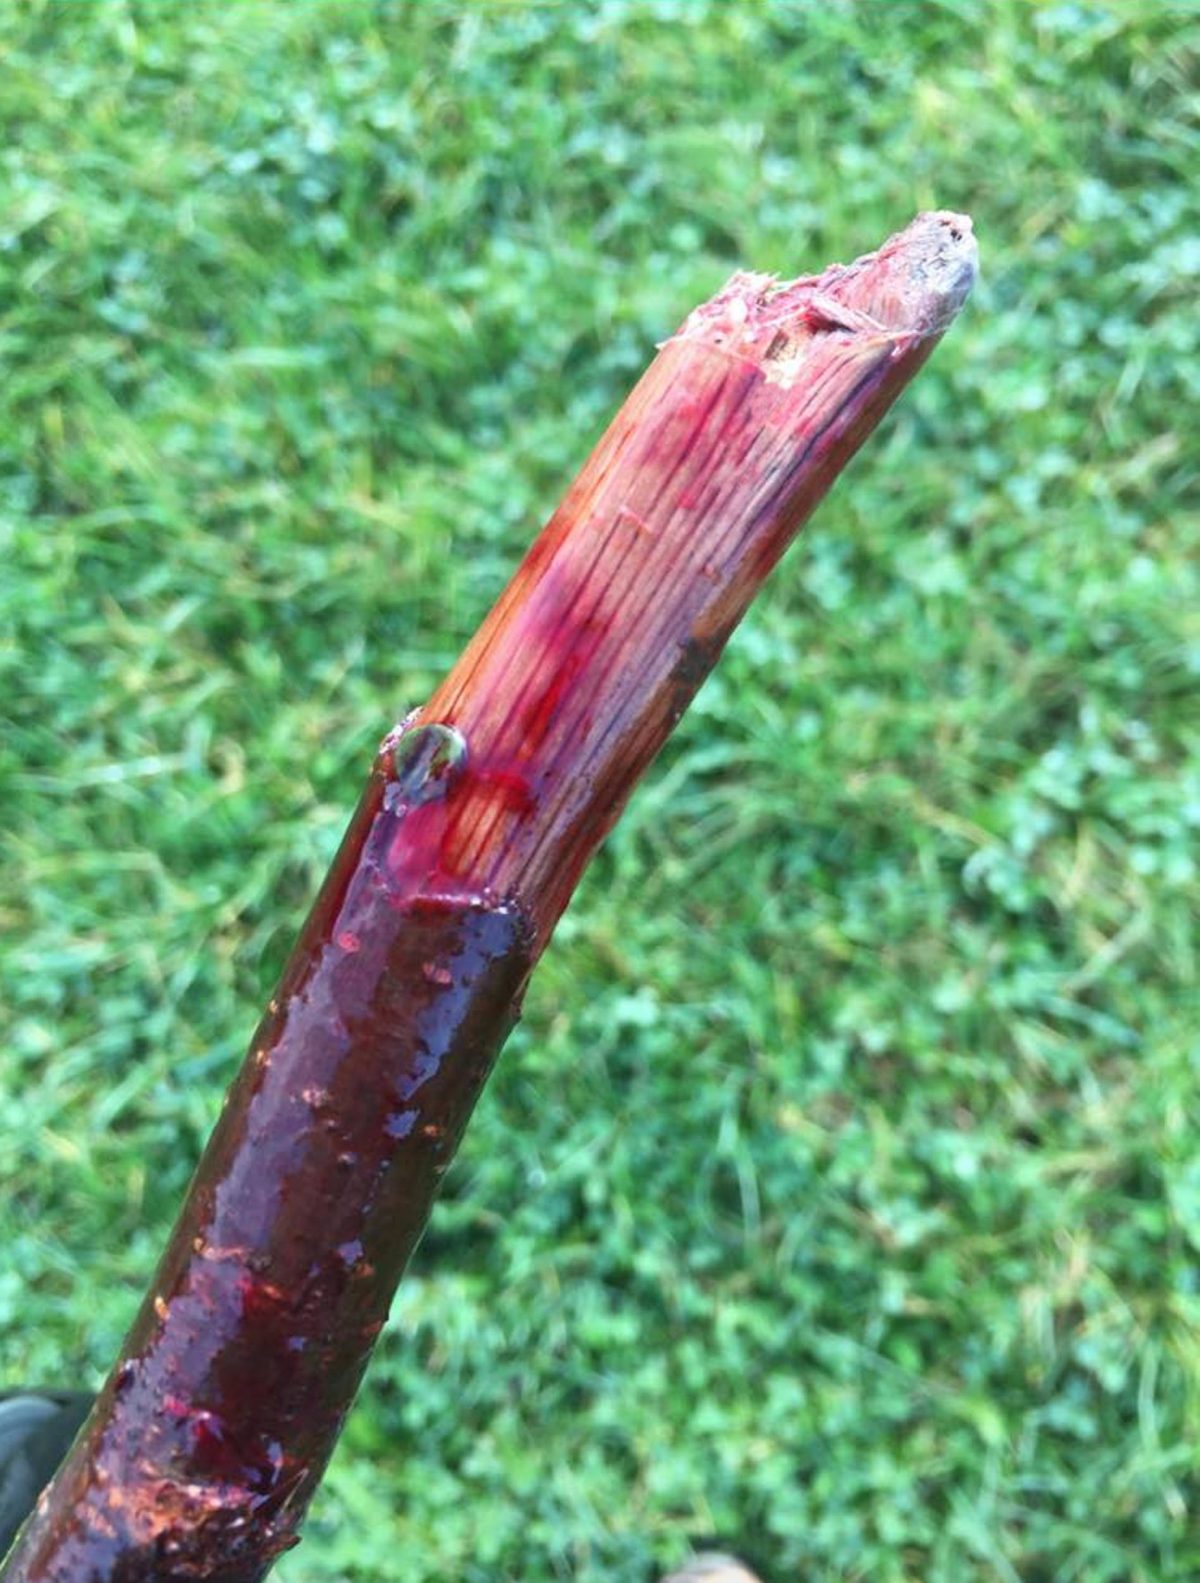 The bloodied stick